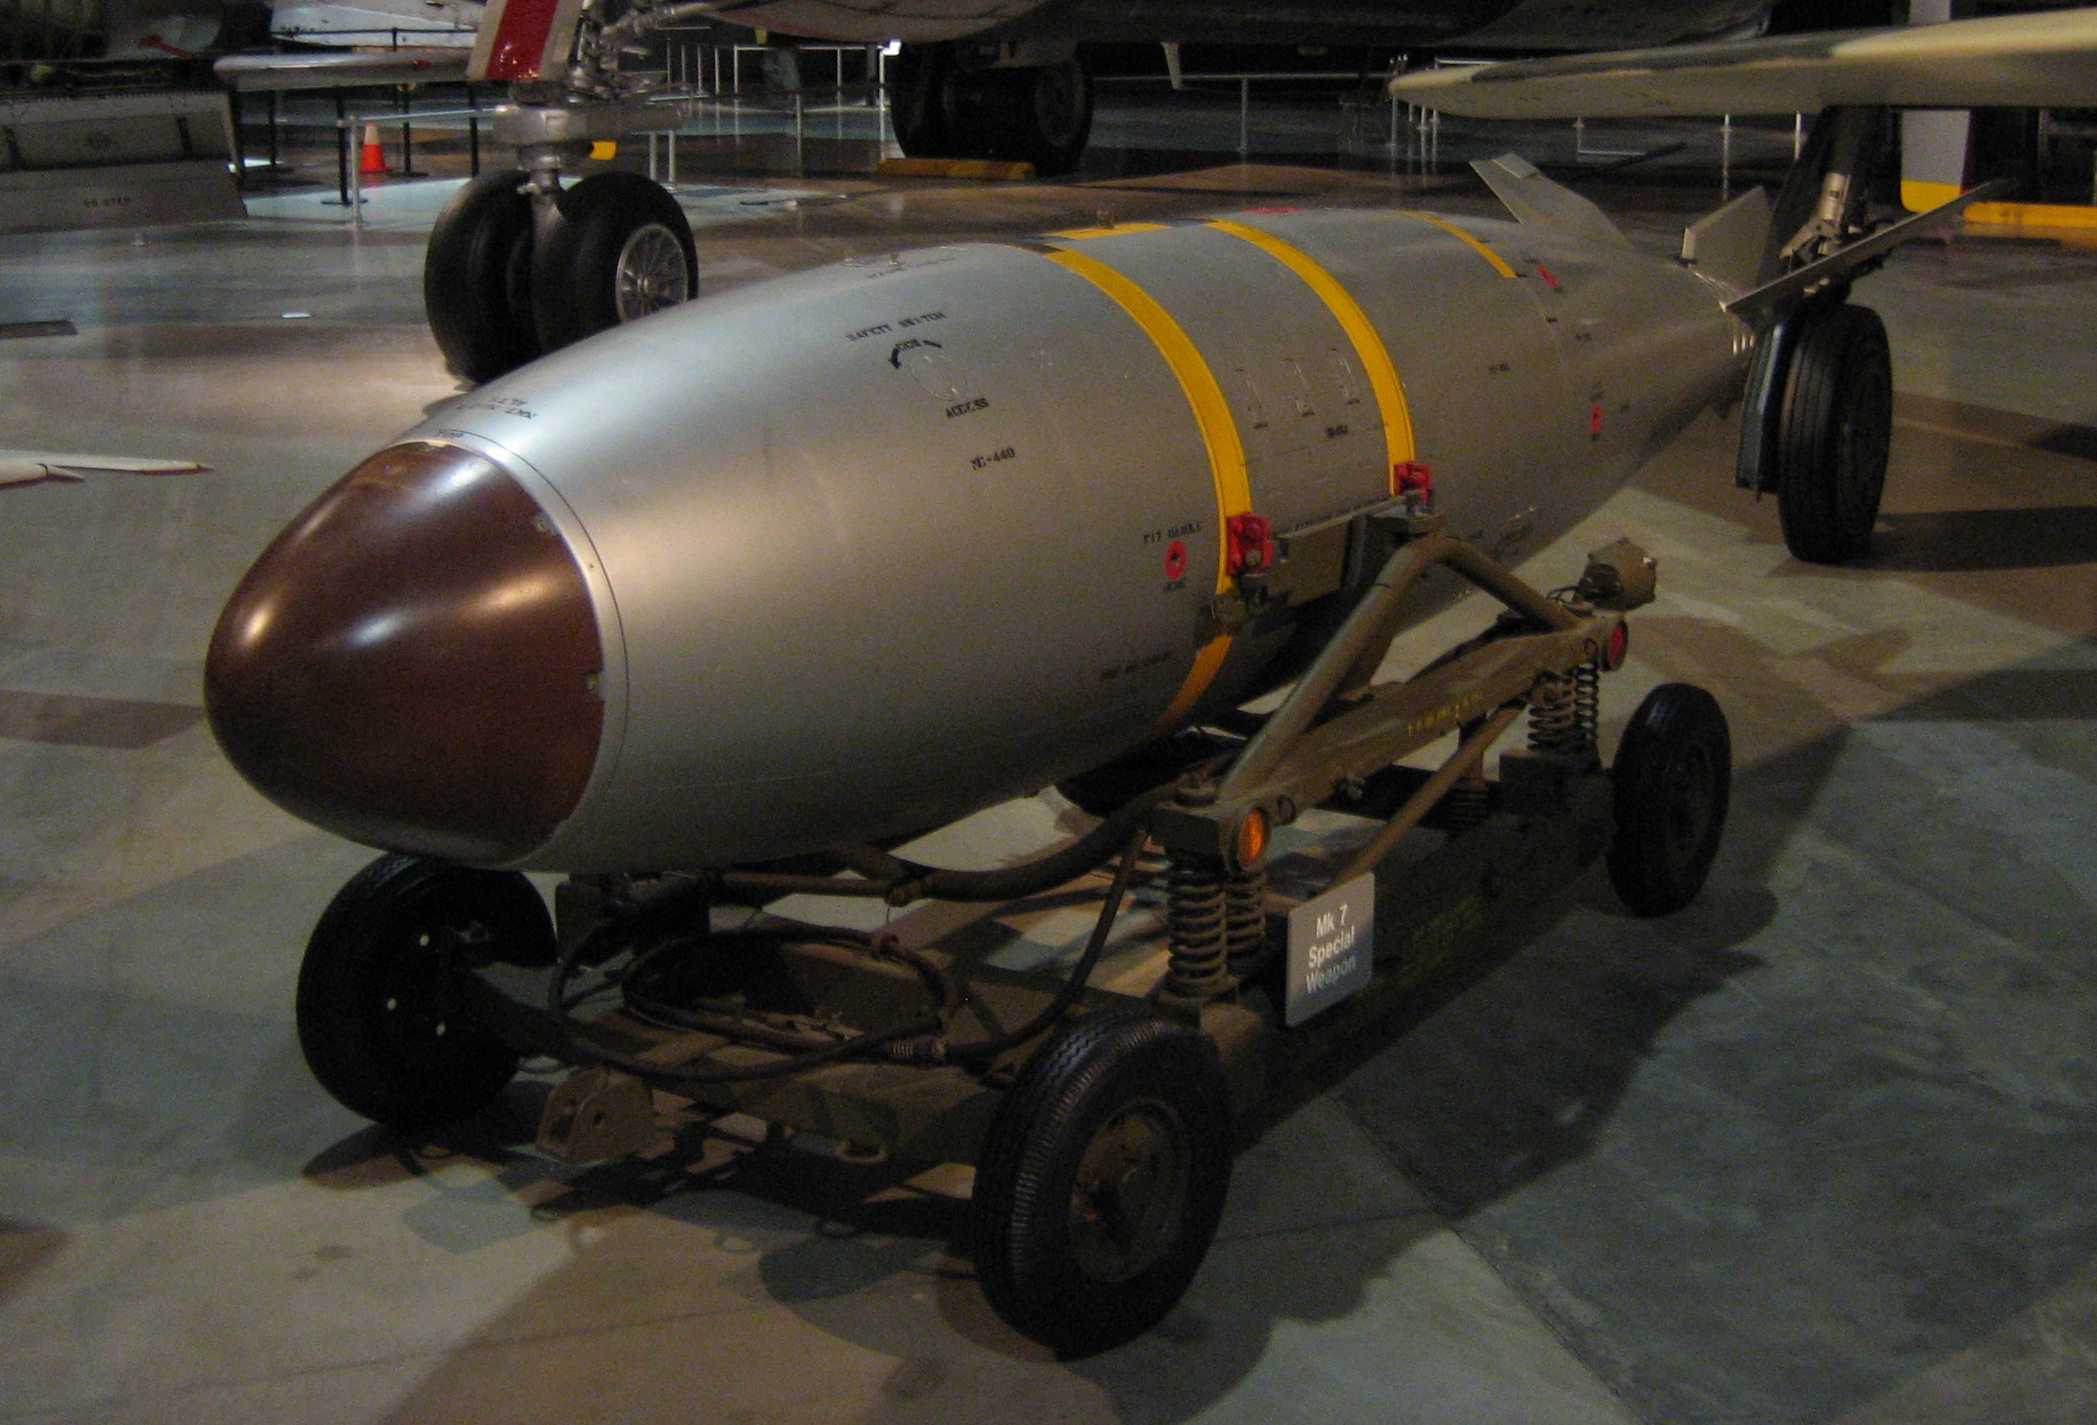 Mark_7_nuclear_bomb_at_USAF_Museum.jpg